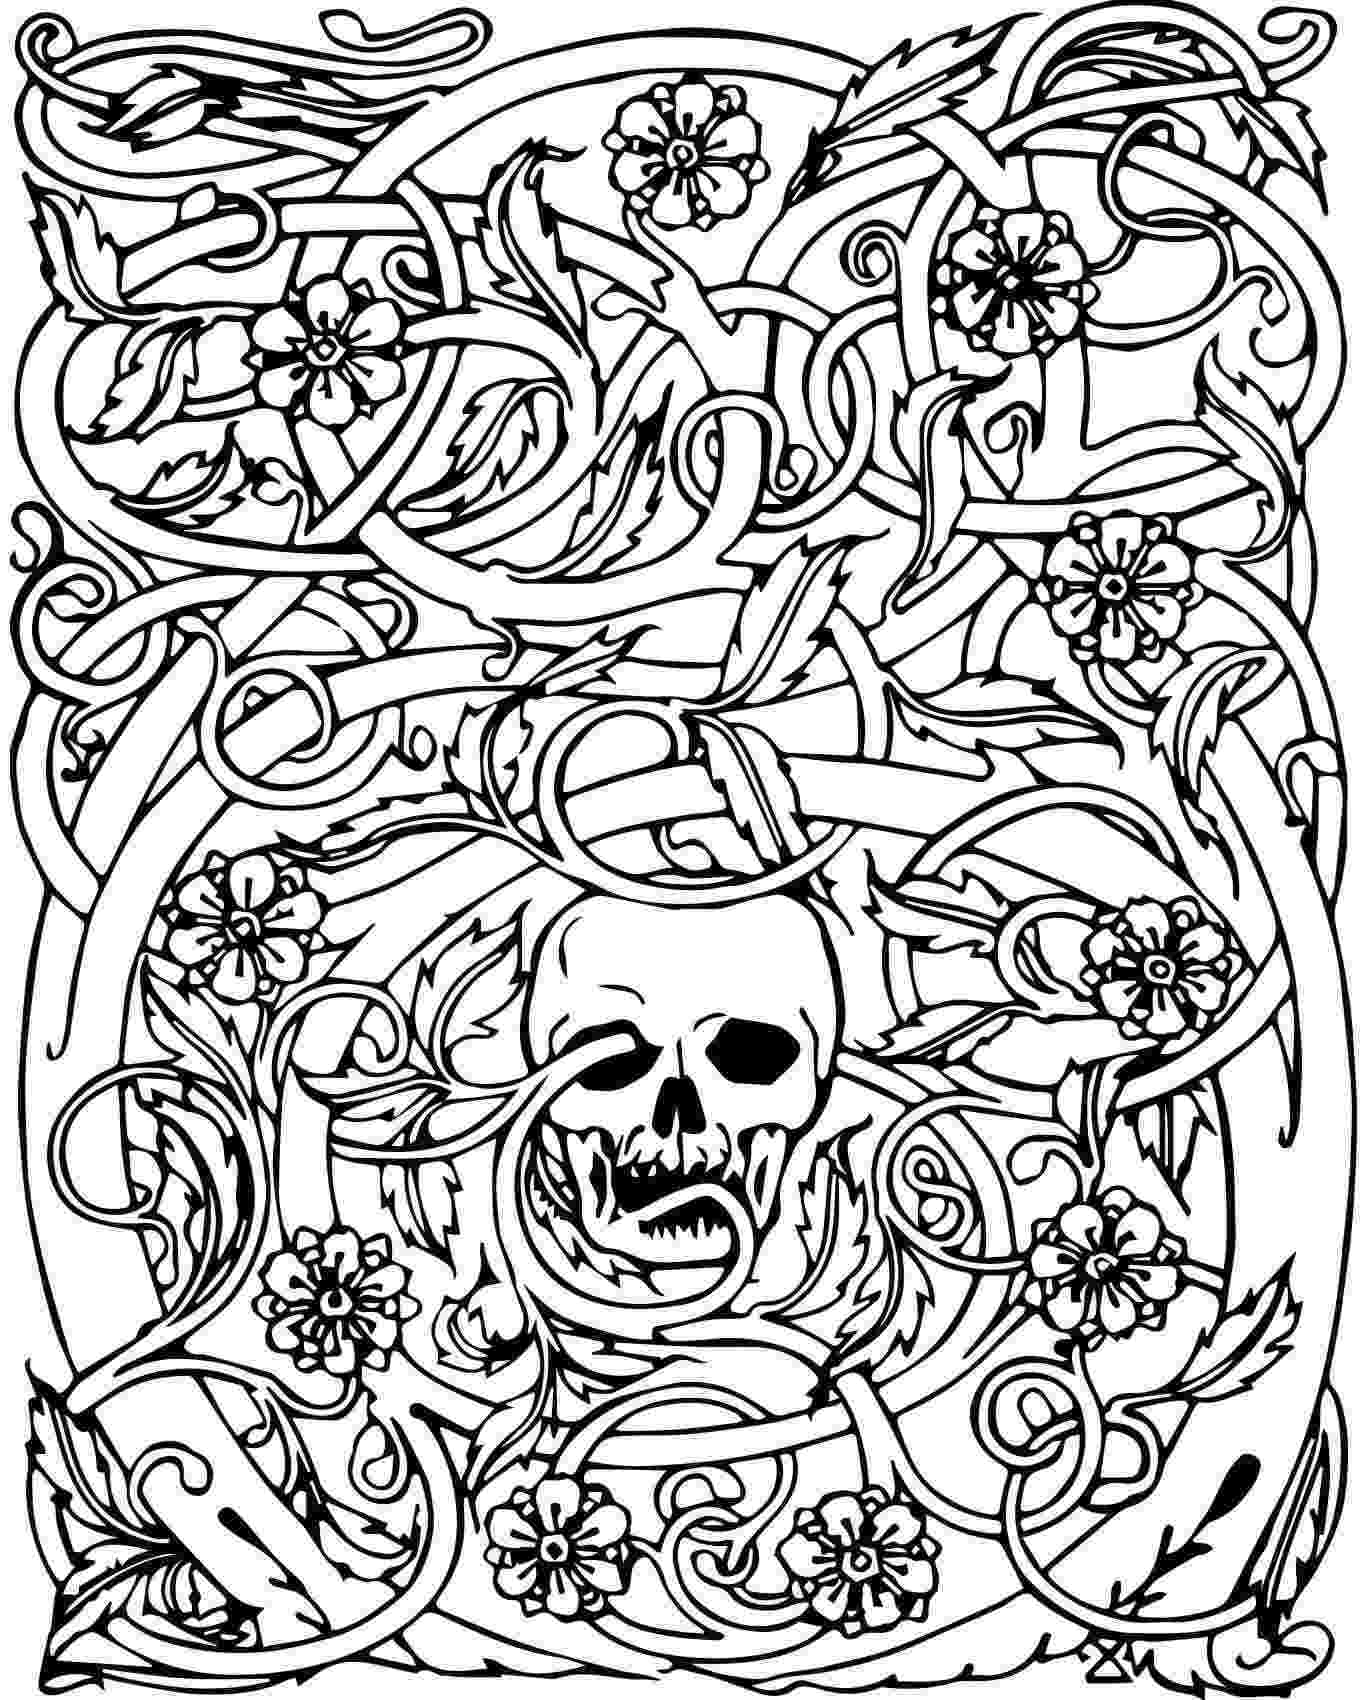 skull coloring pages printable coloring pages skull free printable coloring pages printable coloring pages skull 